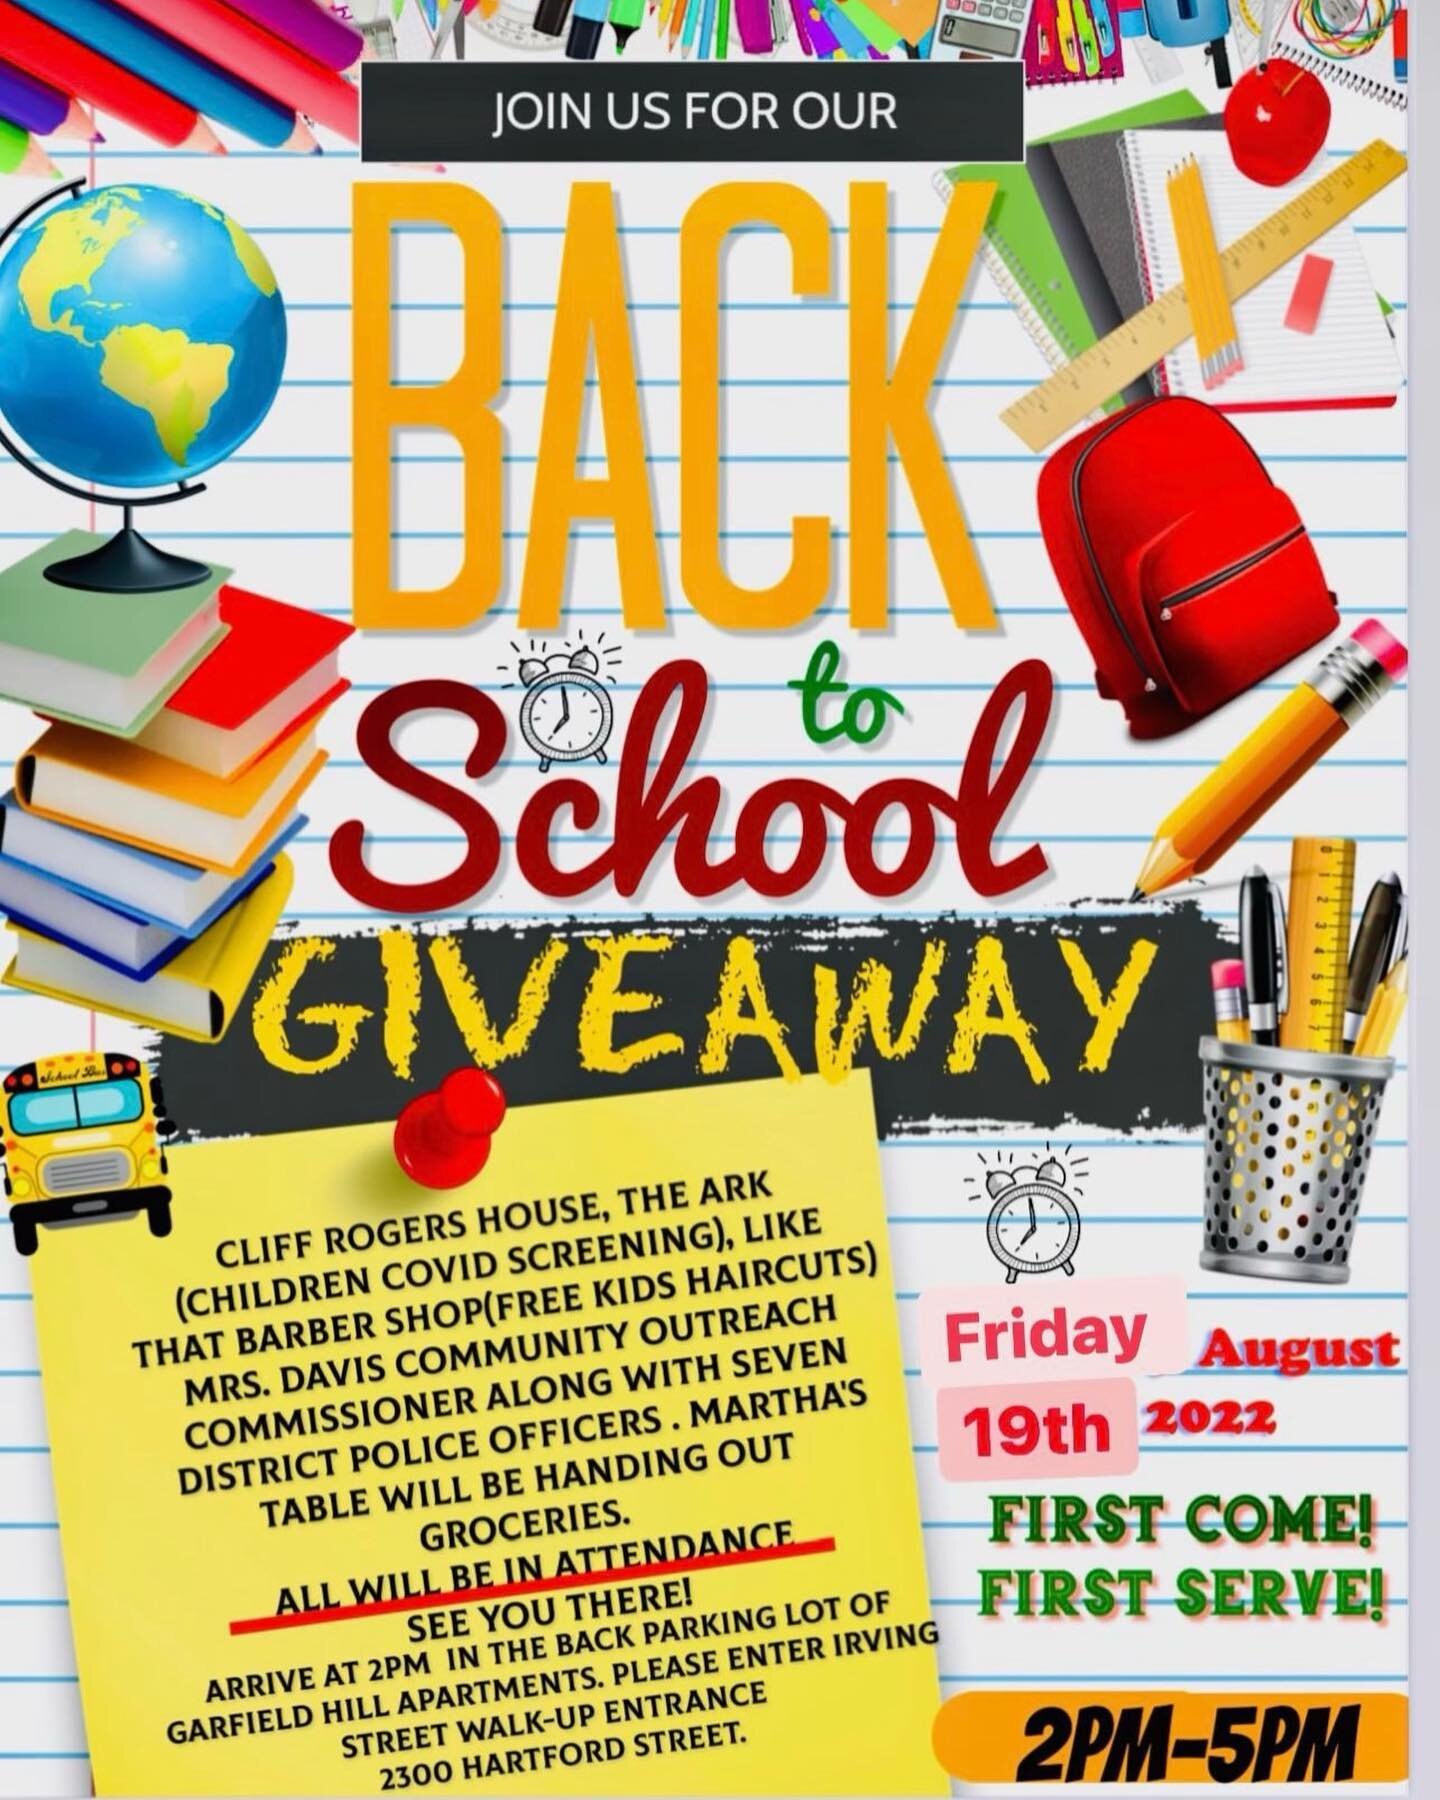 This weeks #Community lineup 🙌🏾 make sure to come in out and support your local community ! 

Back To School Giveaway: Friday August 19th, 2-5pm at Garfield Hill Apts in SE DC

PQC virtual focus group: Friday August 19th, The Perinatal Quality Coll